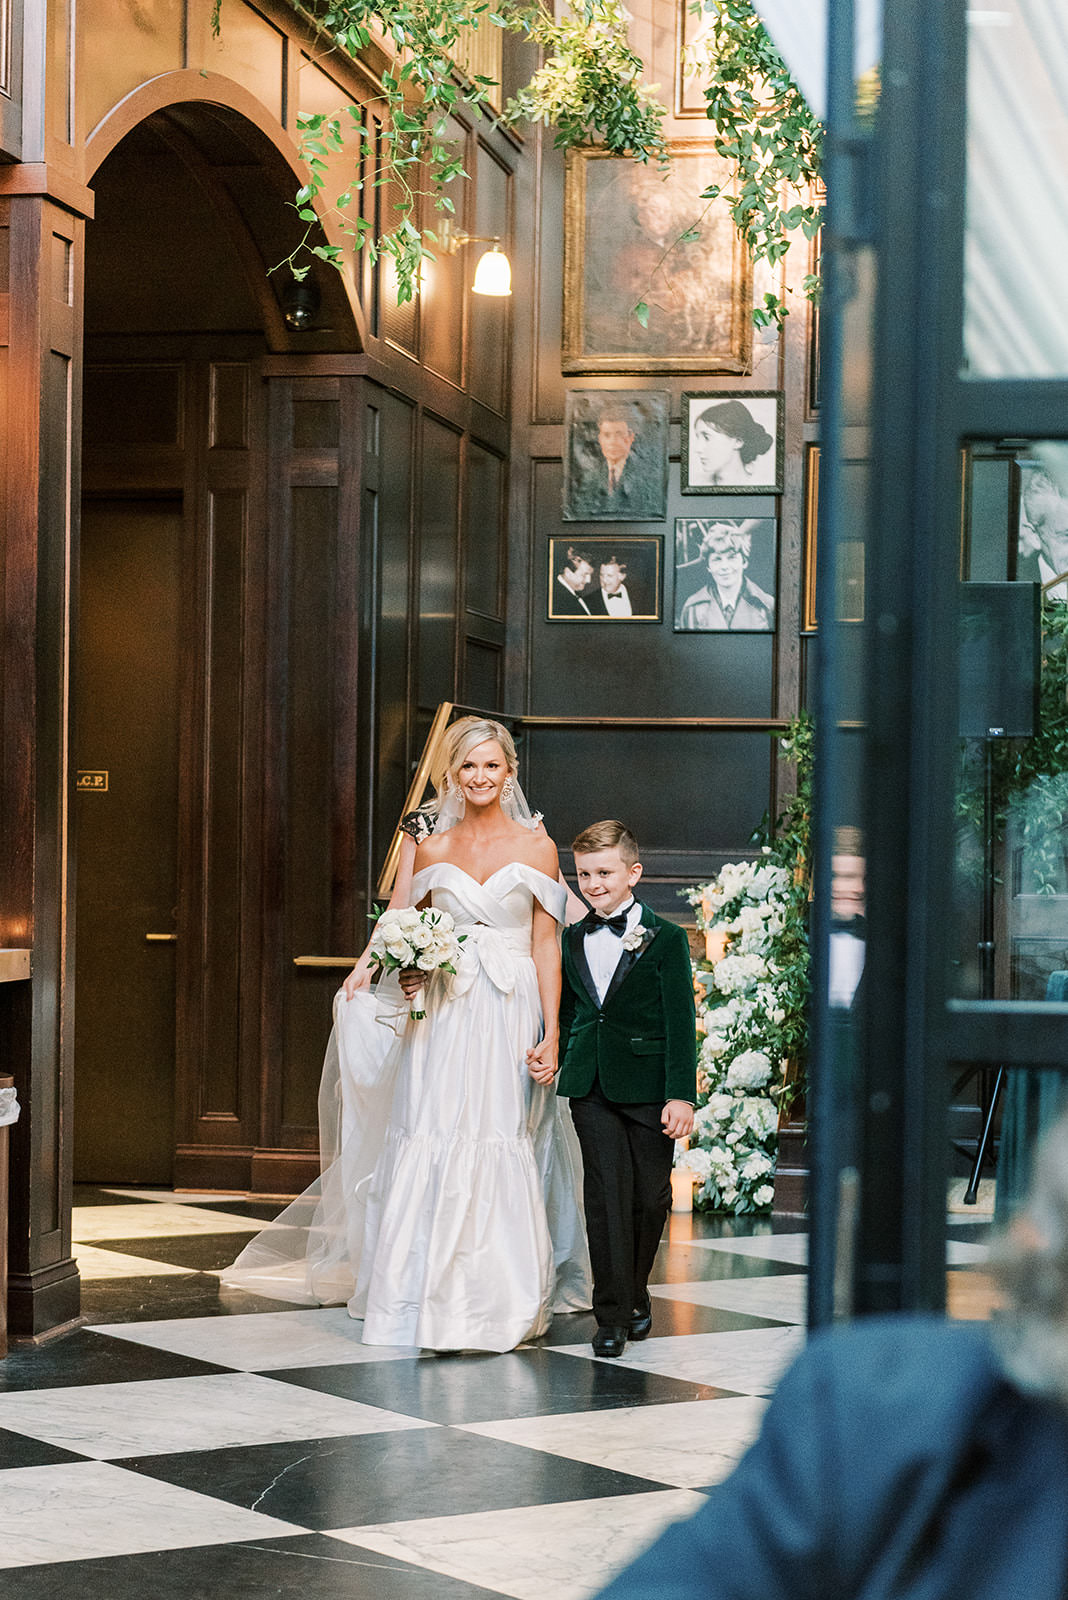 Classic Elegant Bride Walking Down the Wedding Ceremony Aisle Processional with Son | Tampa Bay Wedding Venue Oxford Exchange